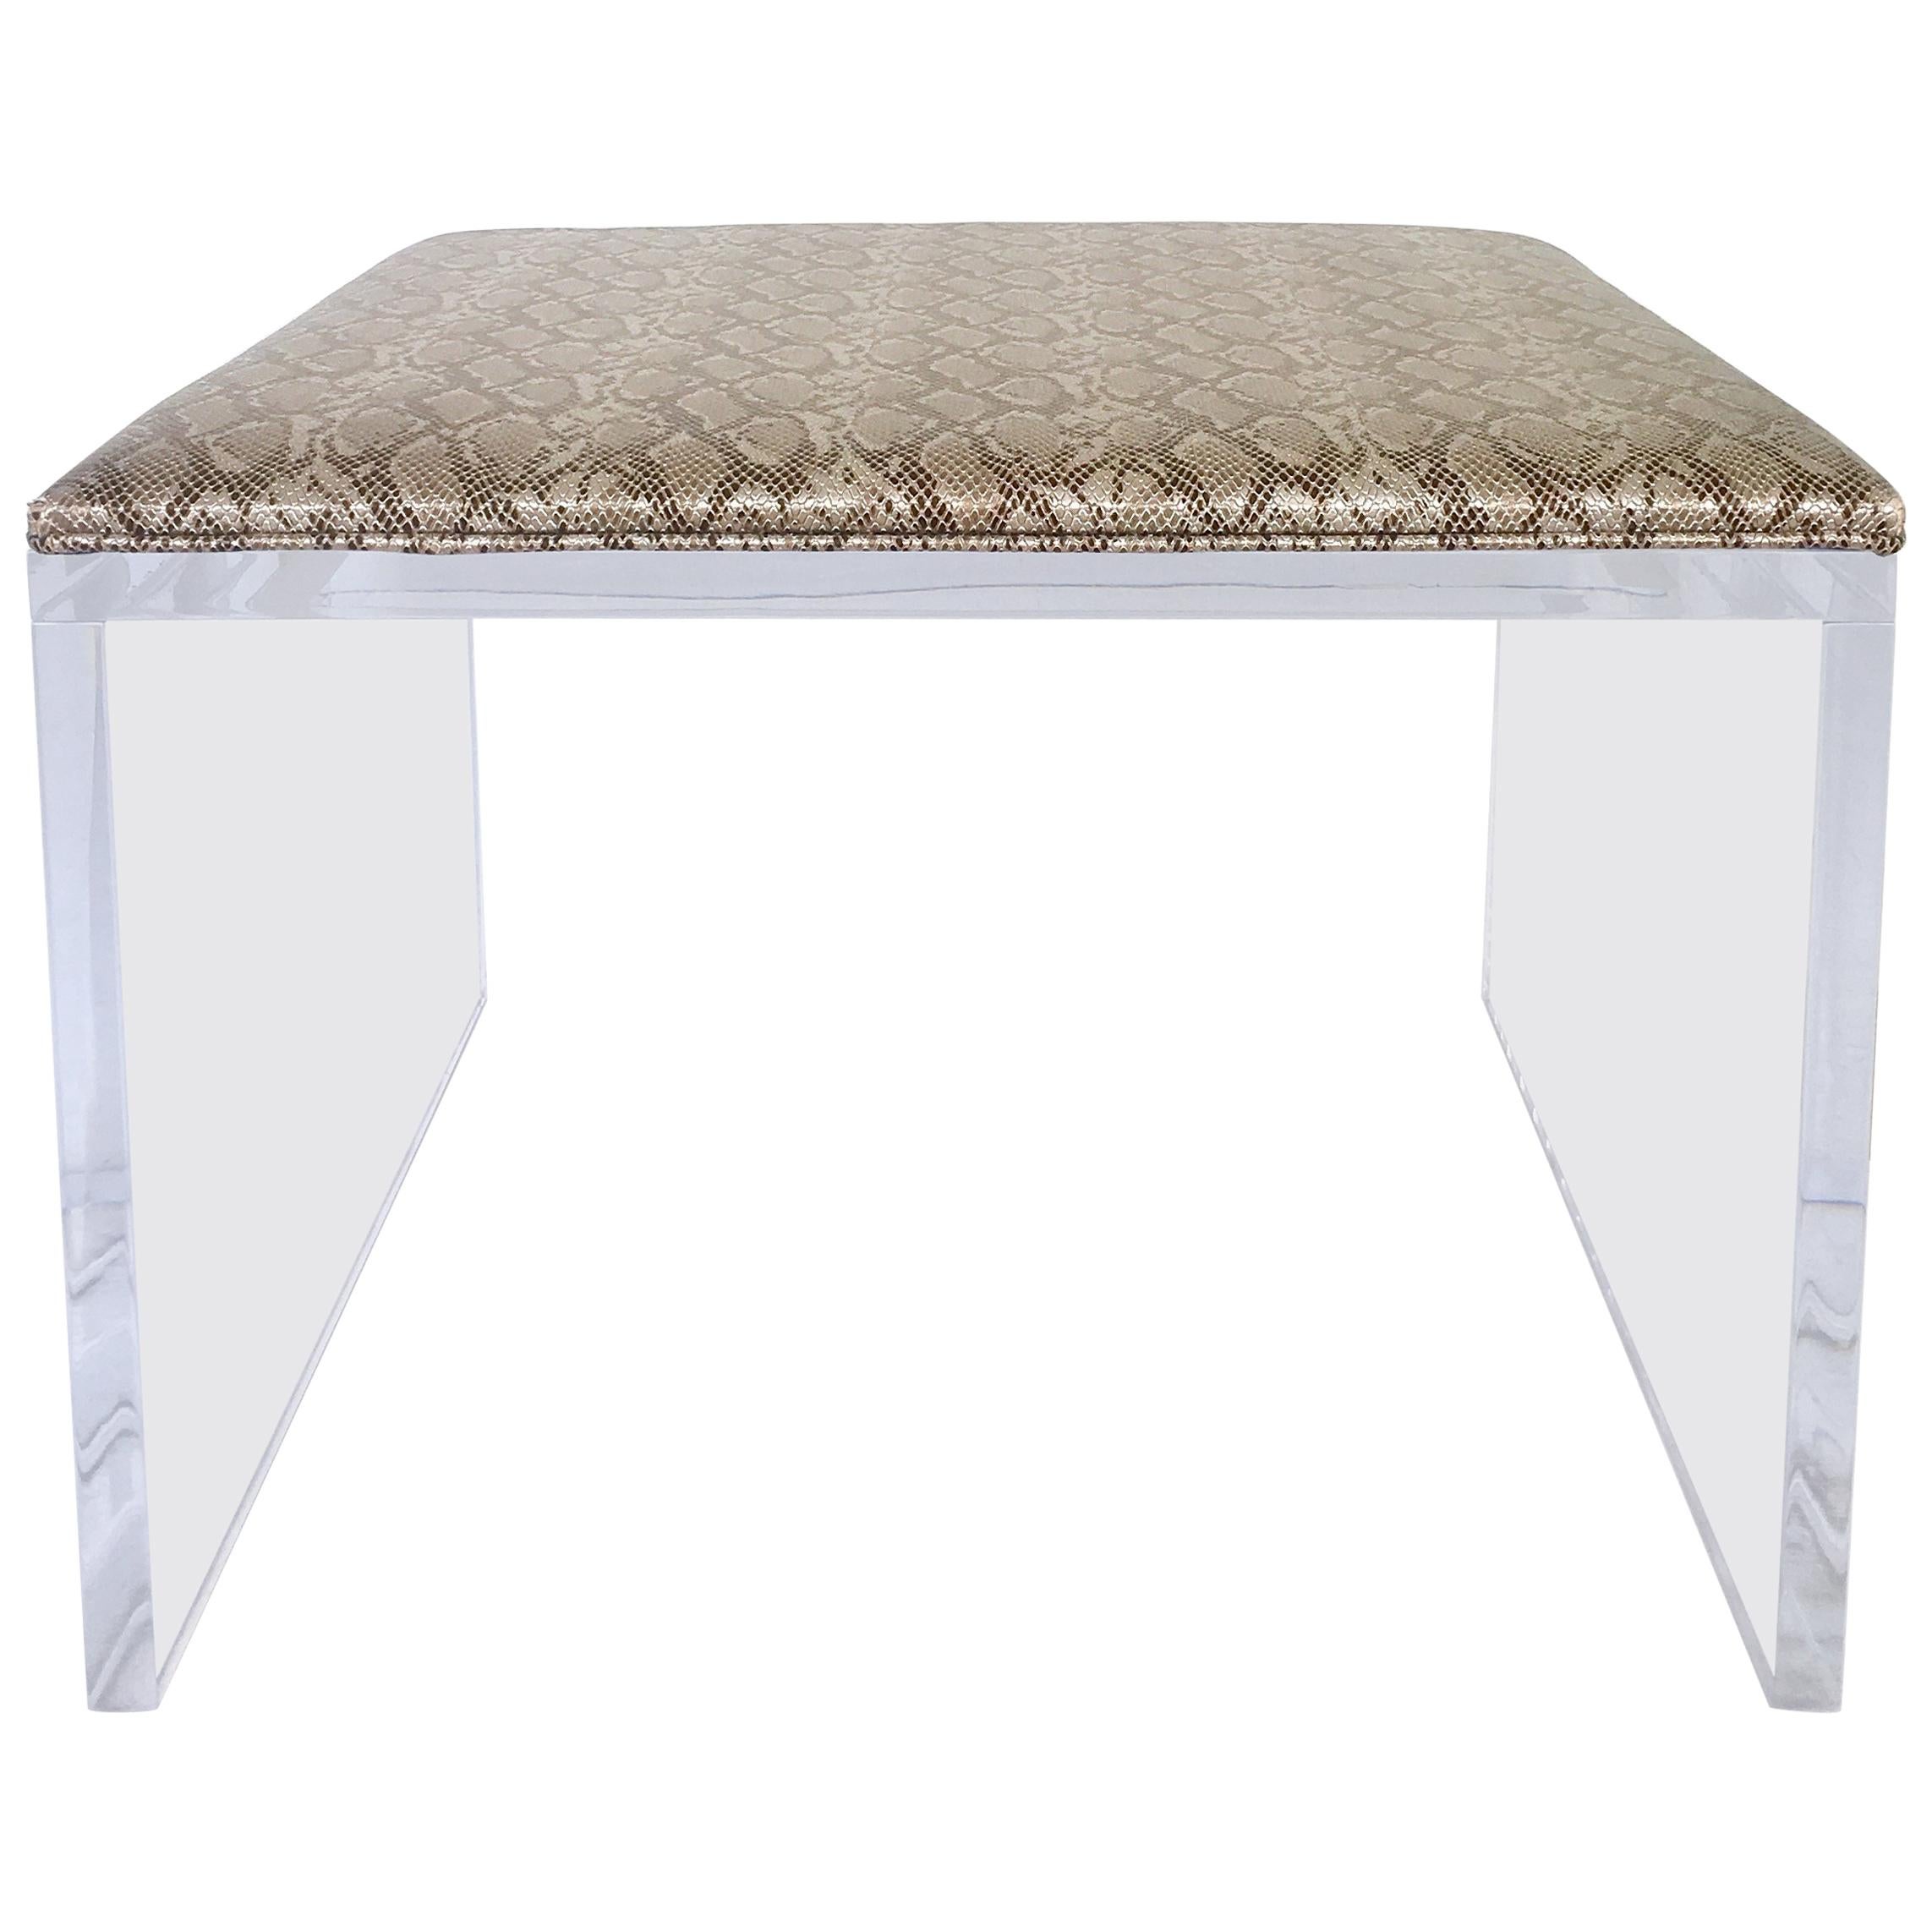 21st Century Contemporary Lucite Upholstered Bench Or Table For Sale